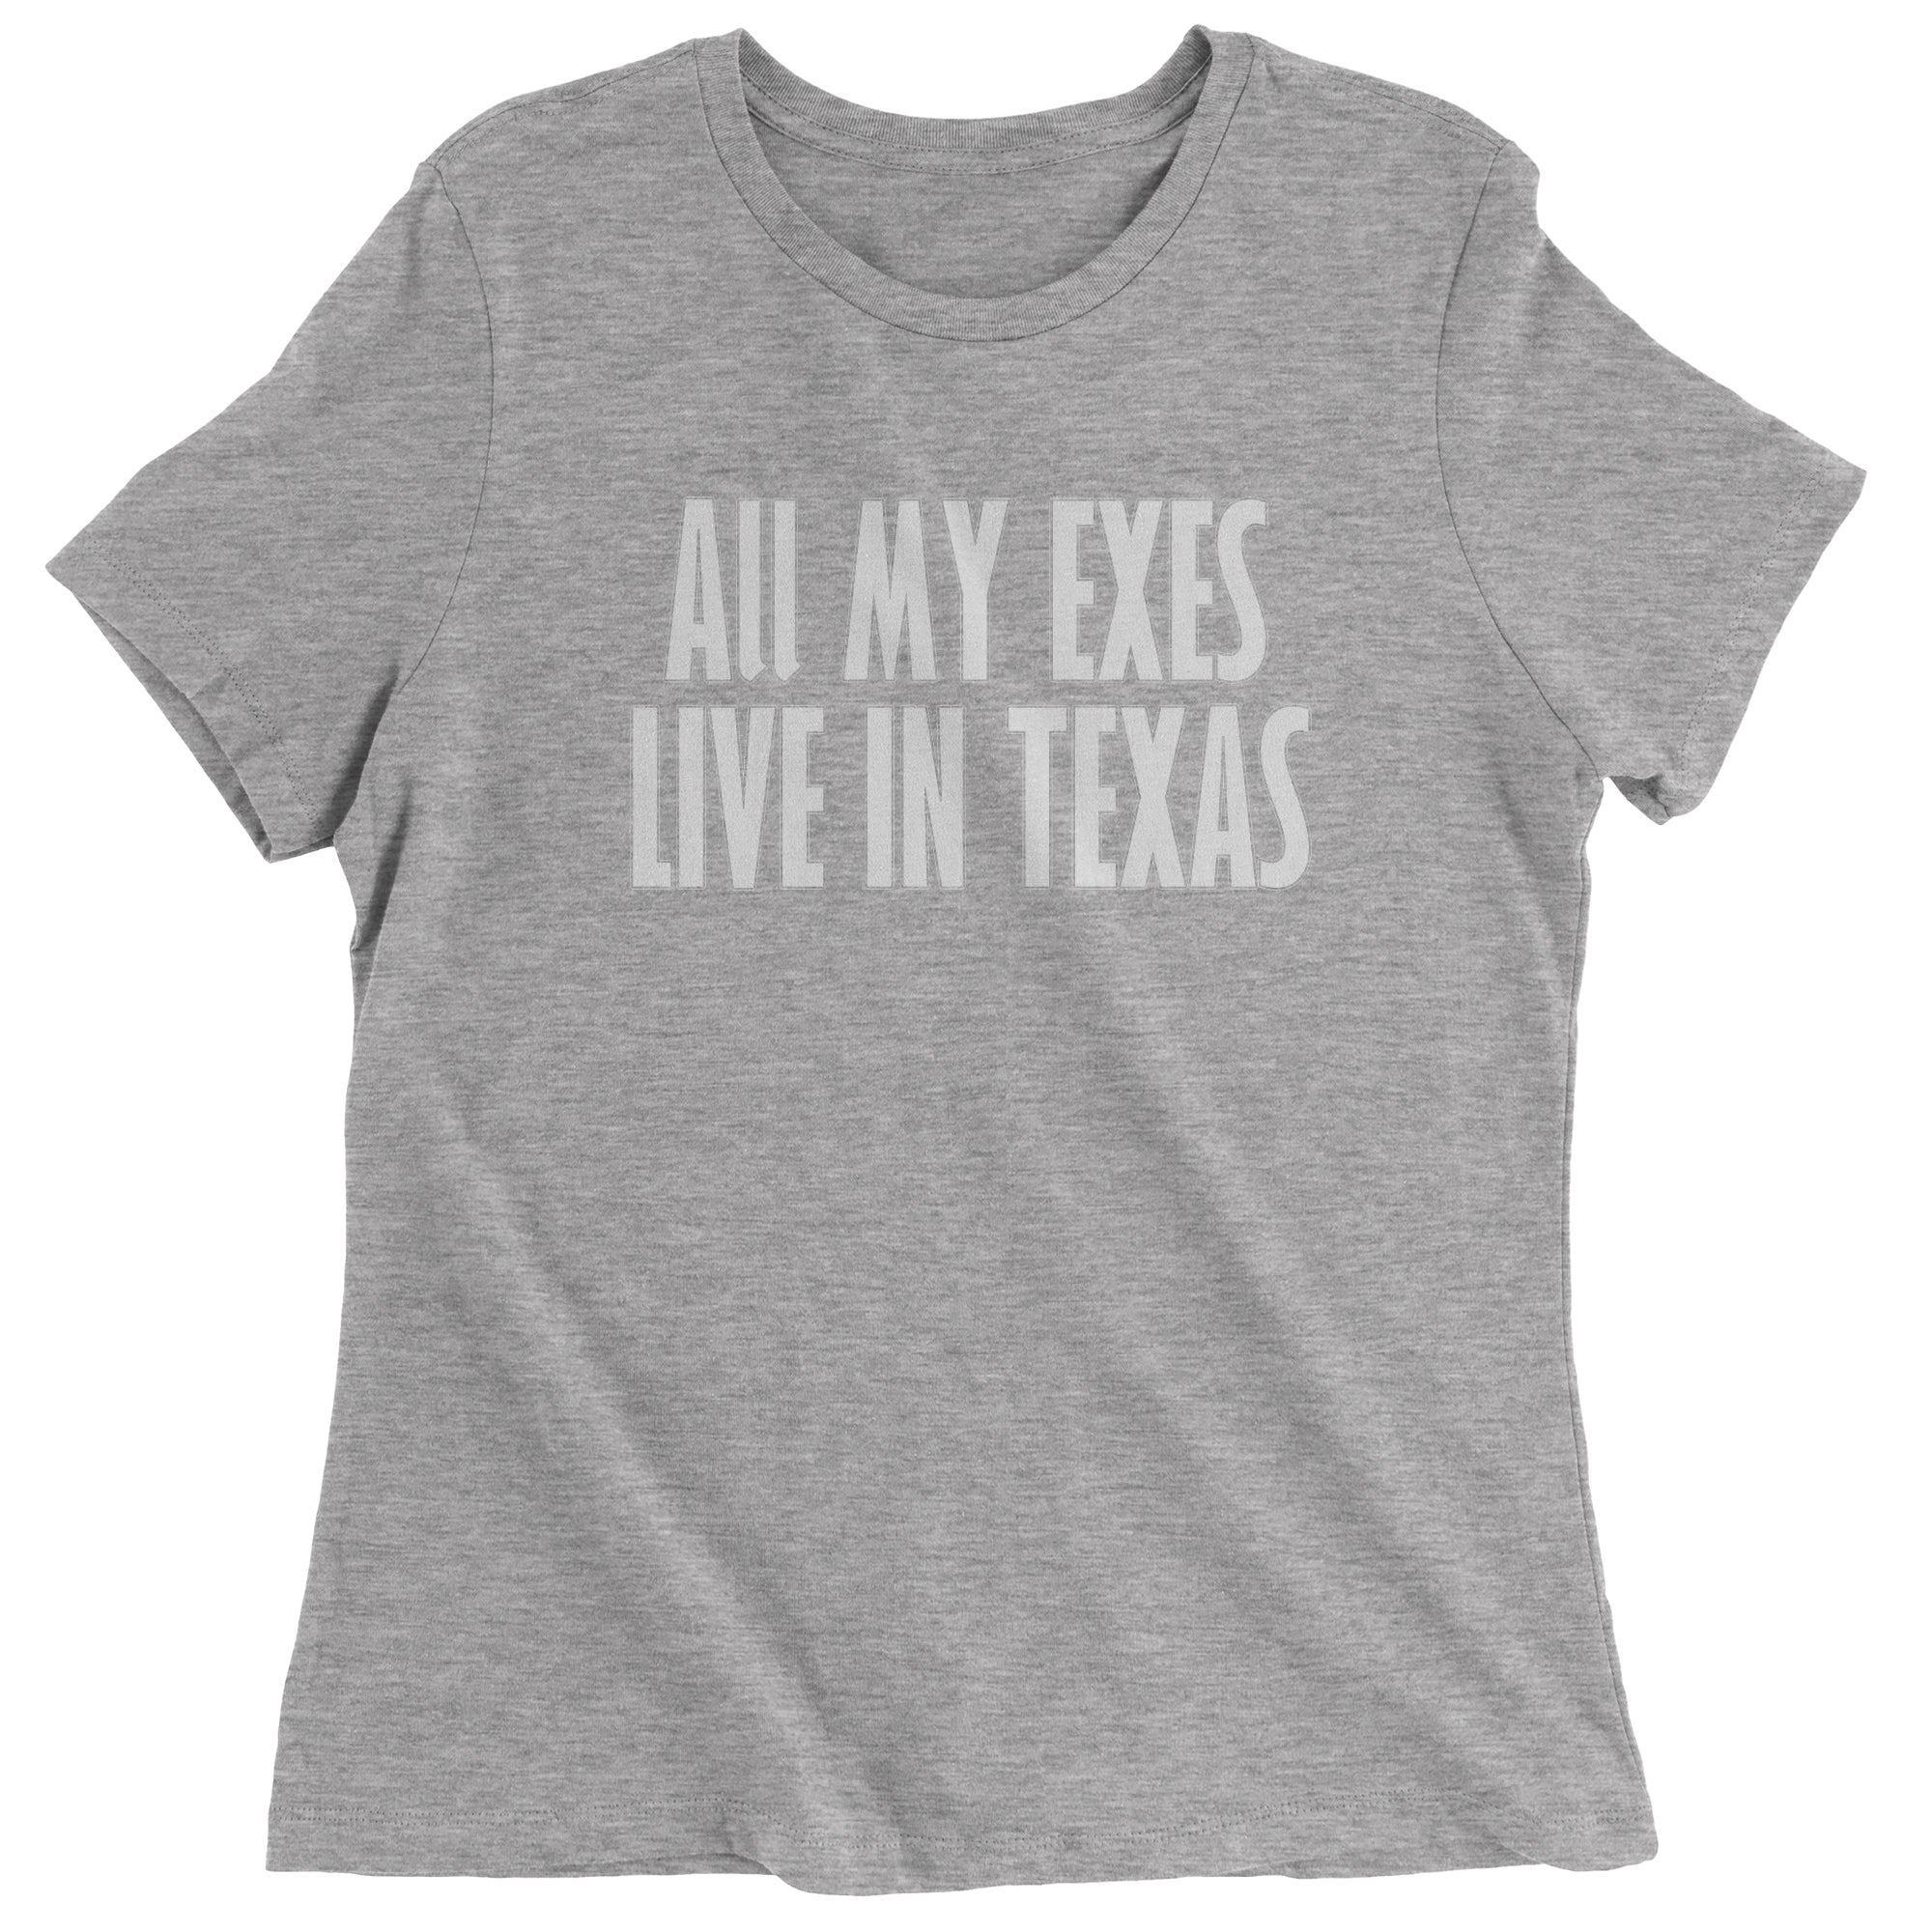 All My Exes Live In Texas Women's T-Shirt